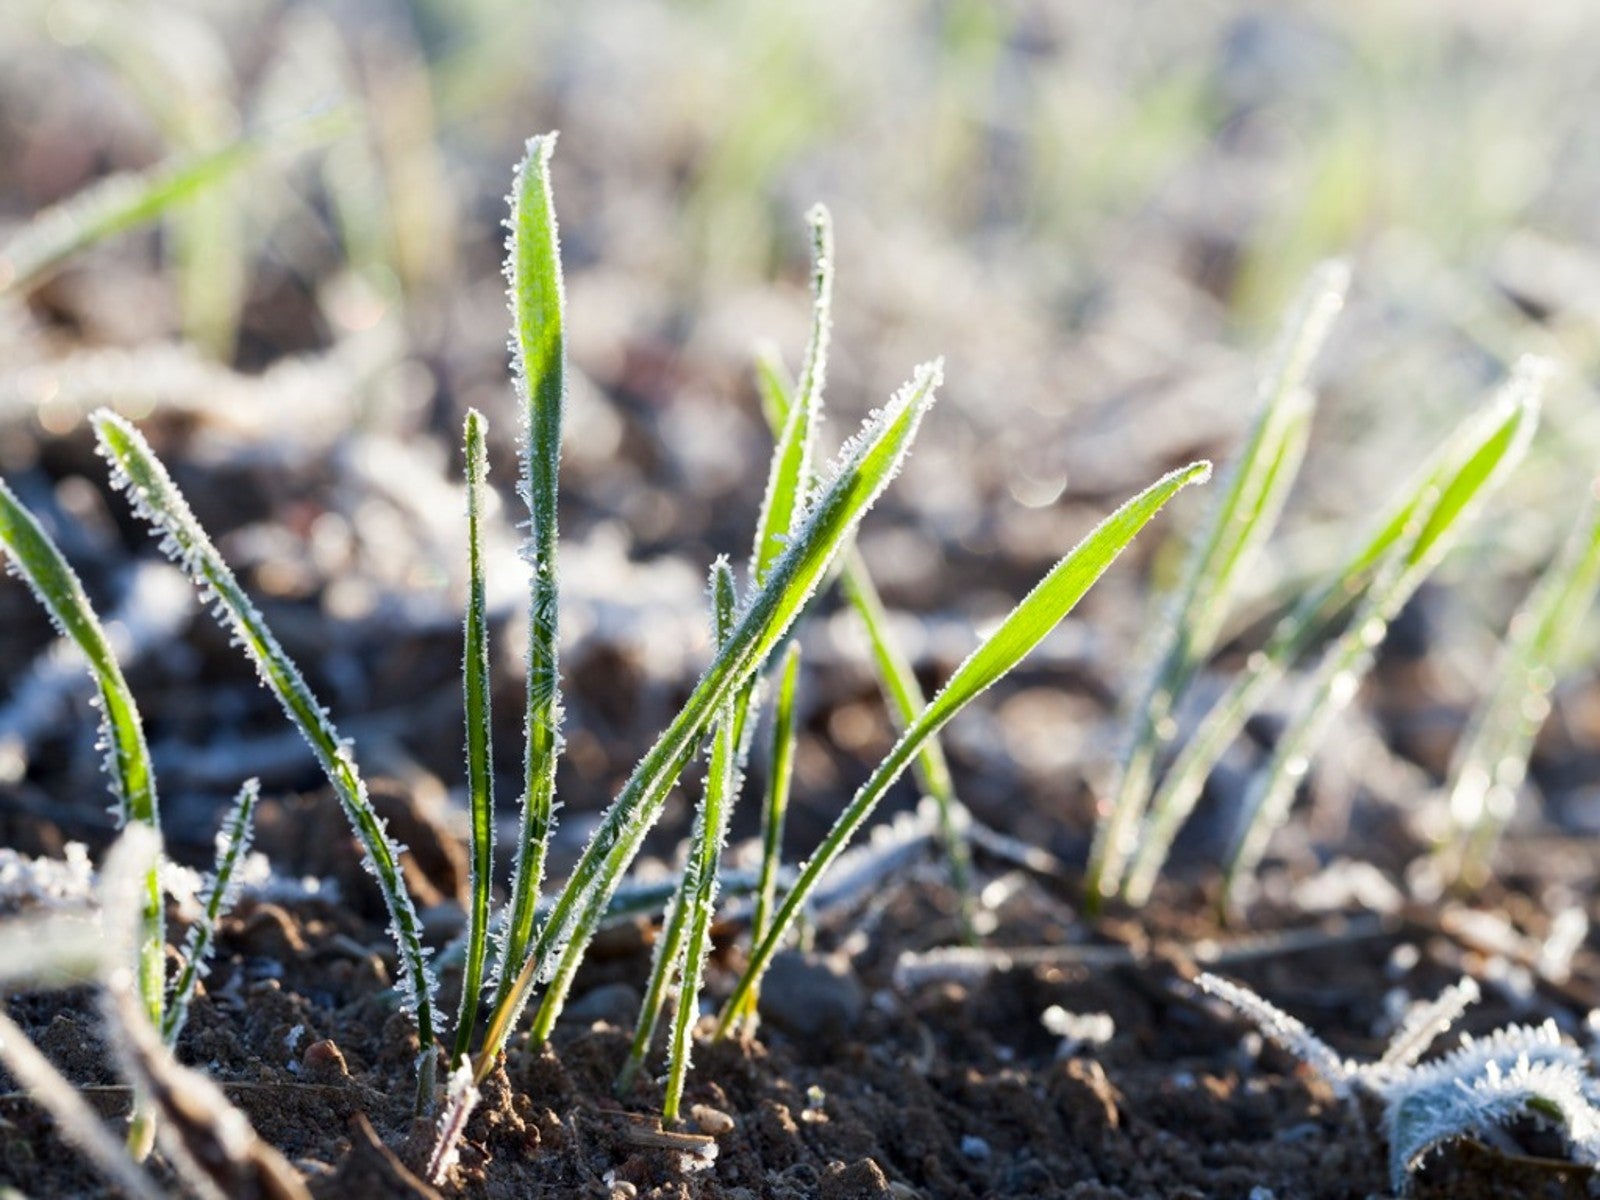 How To Protect Grass Seedlings From Frost